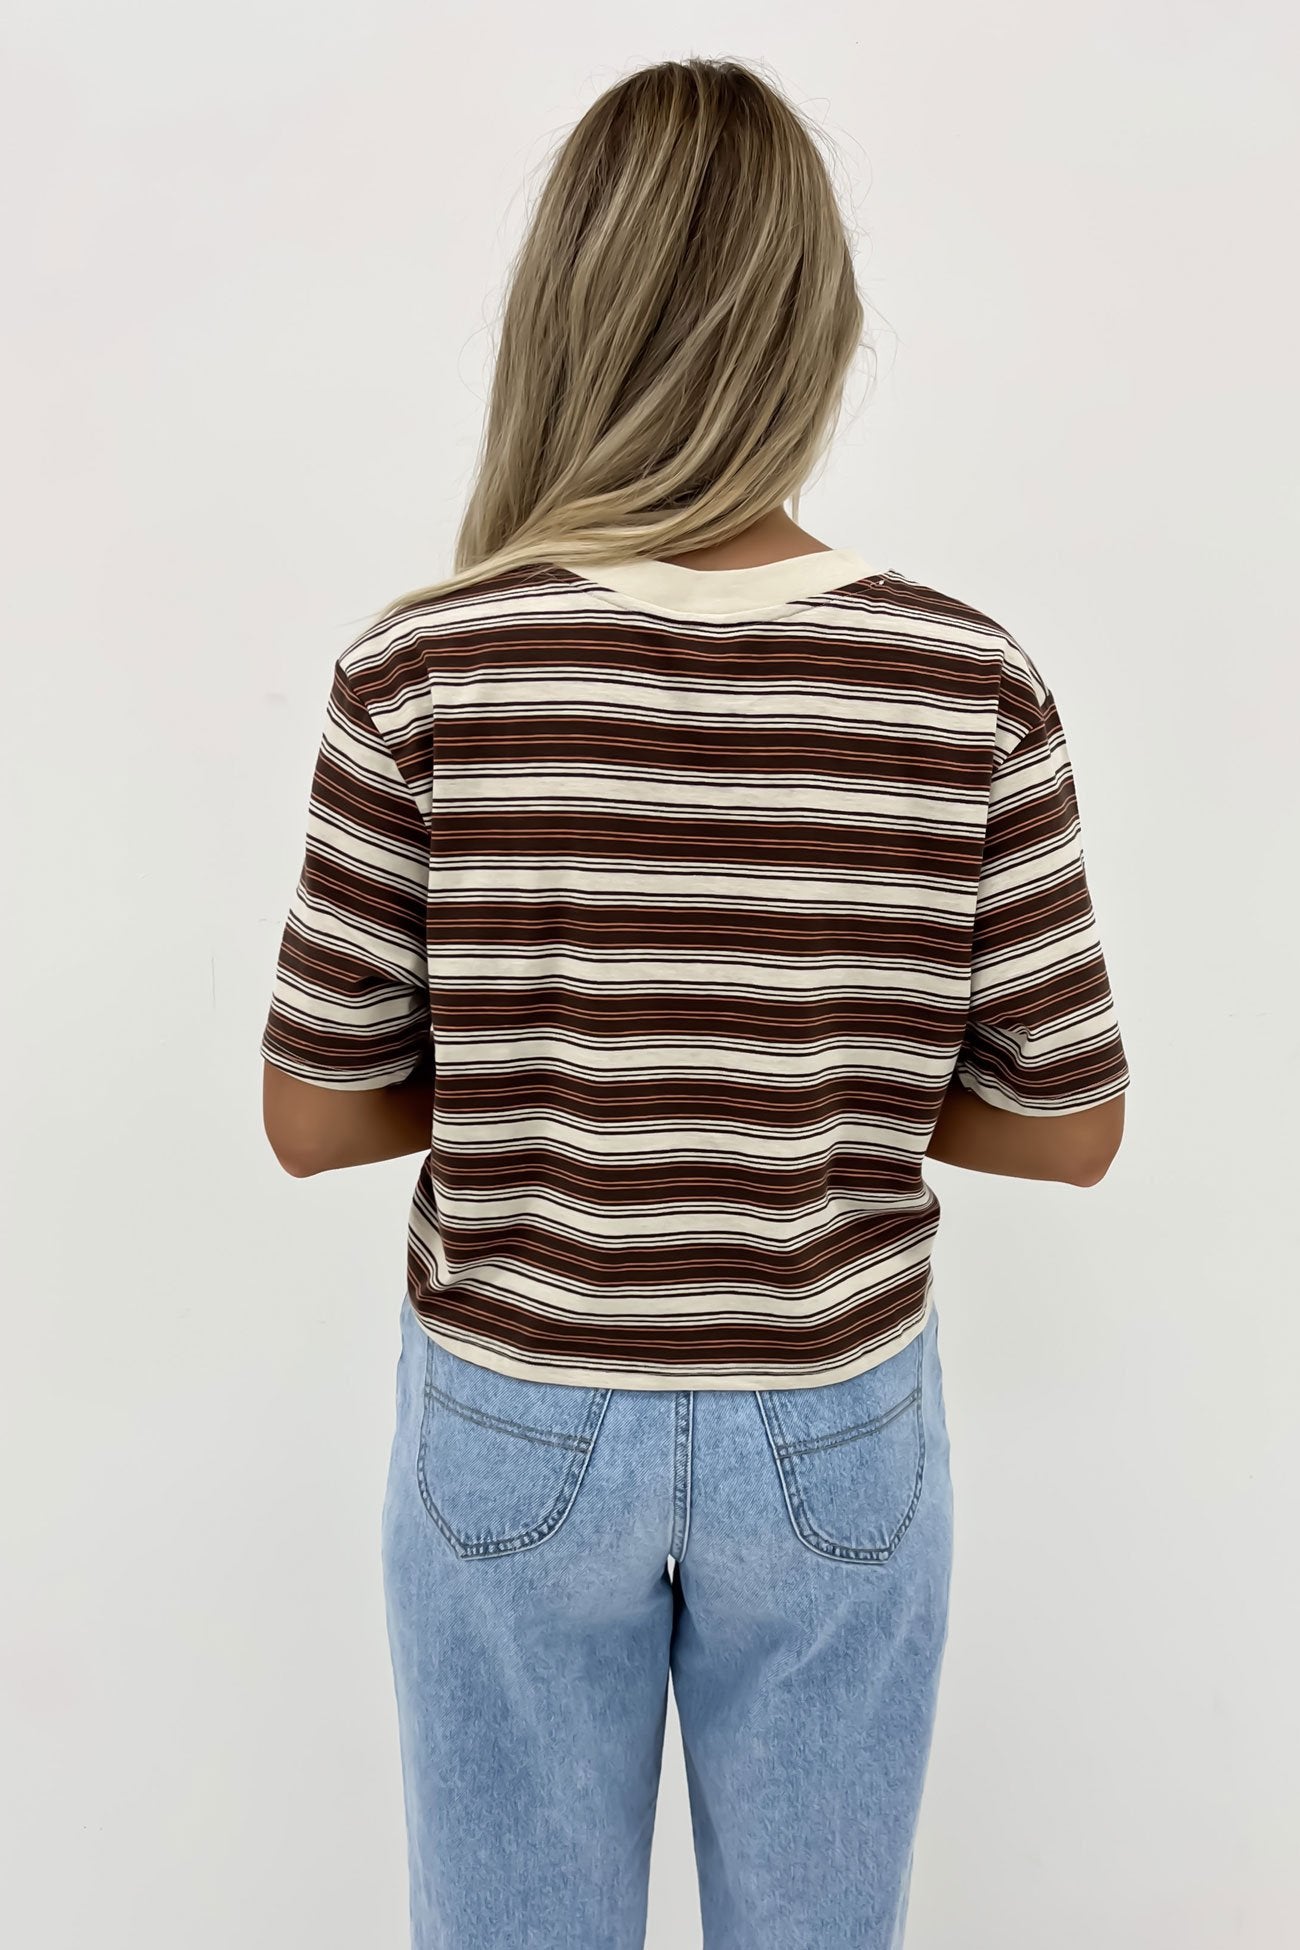 Pennant Patched Short Sleeve Tee Rust